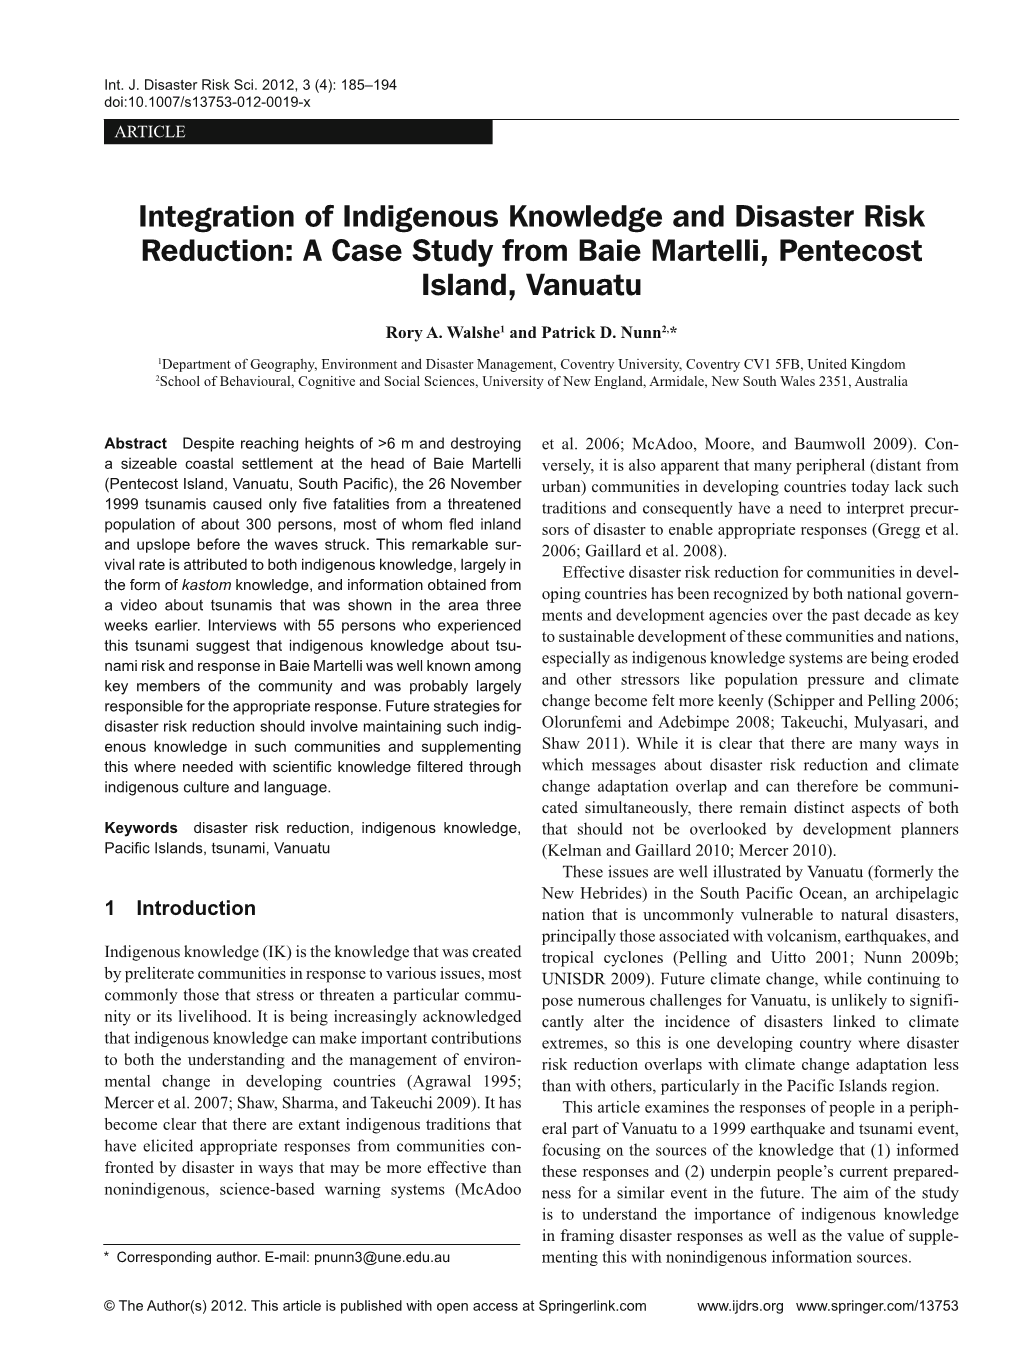 Integration of Indigenous Knowledge and Disaster Risk Reduction: a Case Study from Baie Martelli, Pentecost Island, Vanuatu